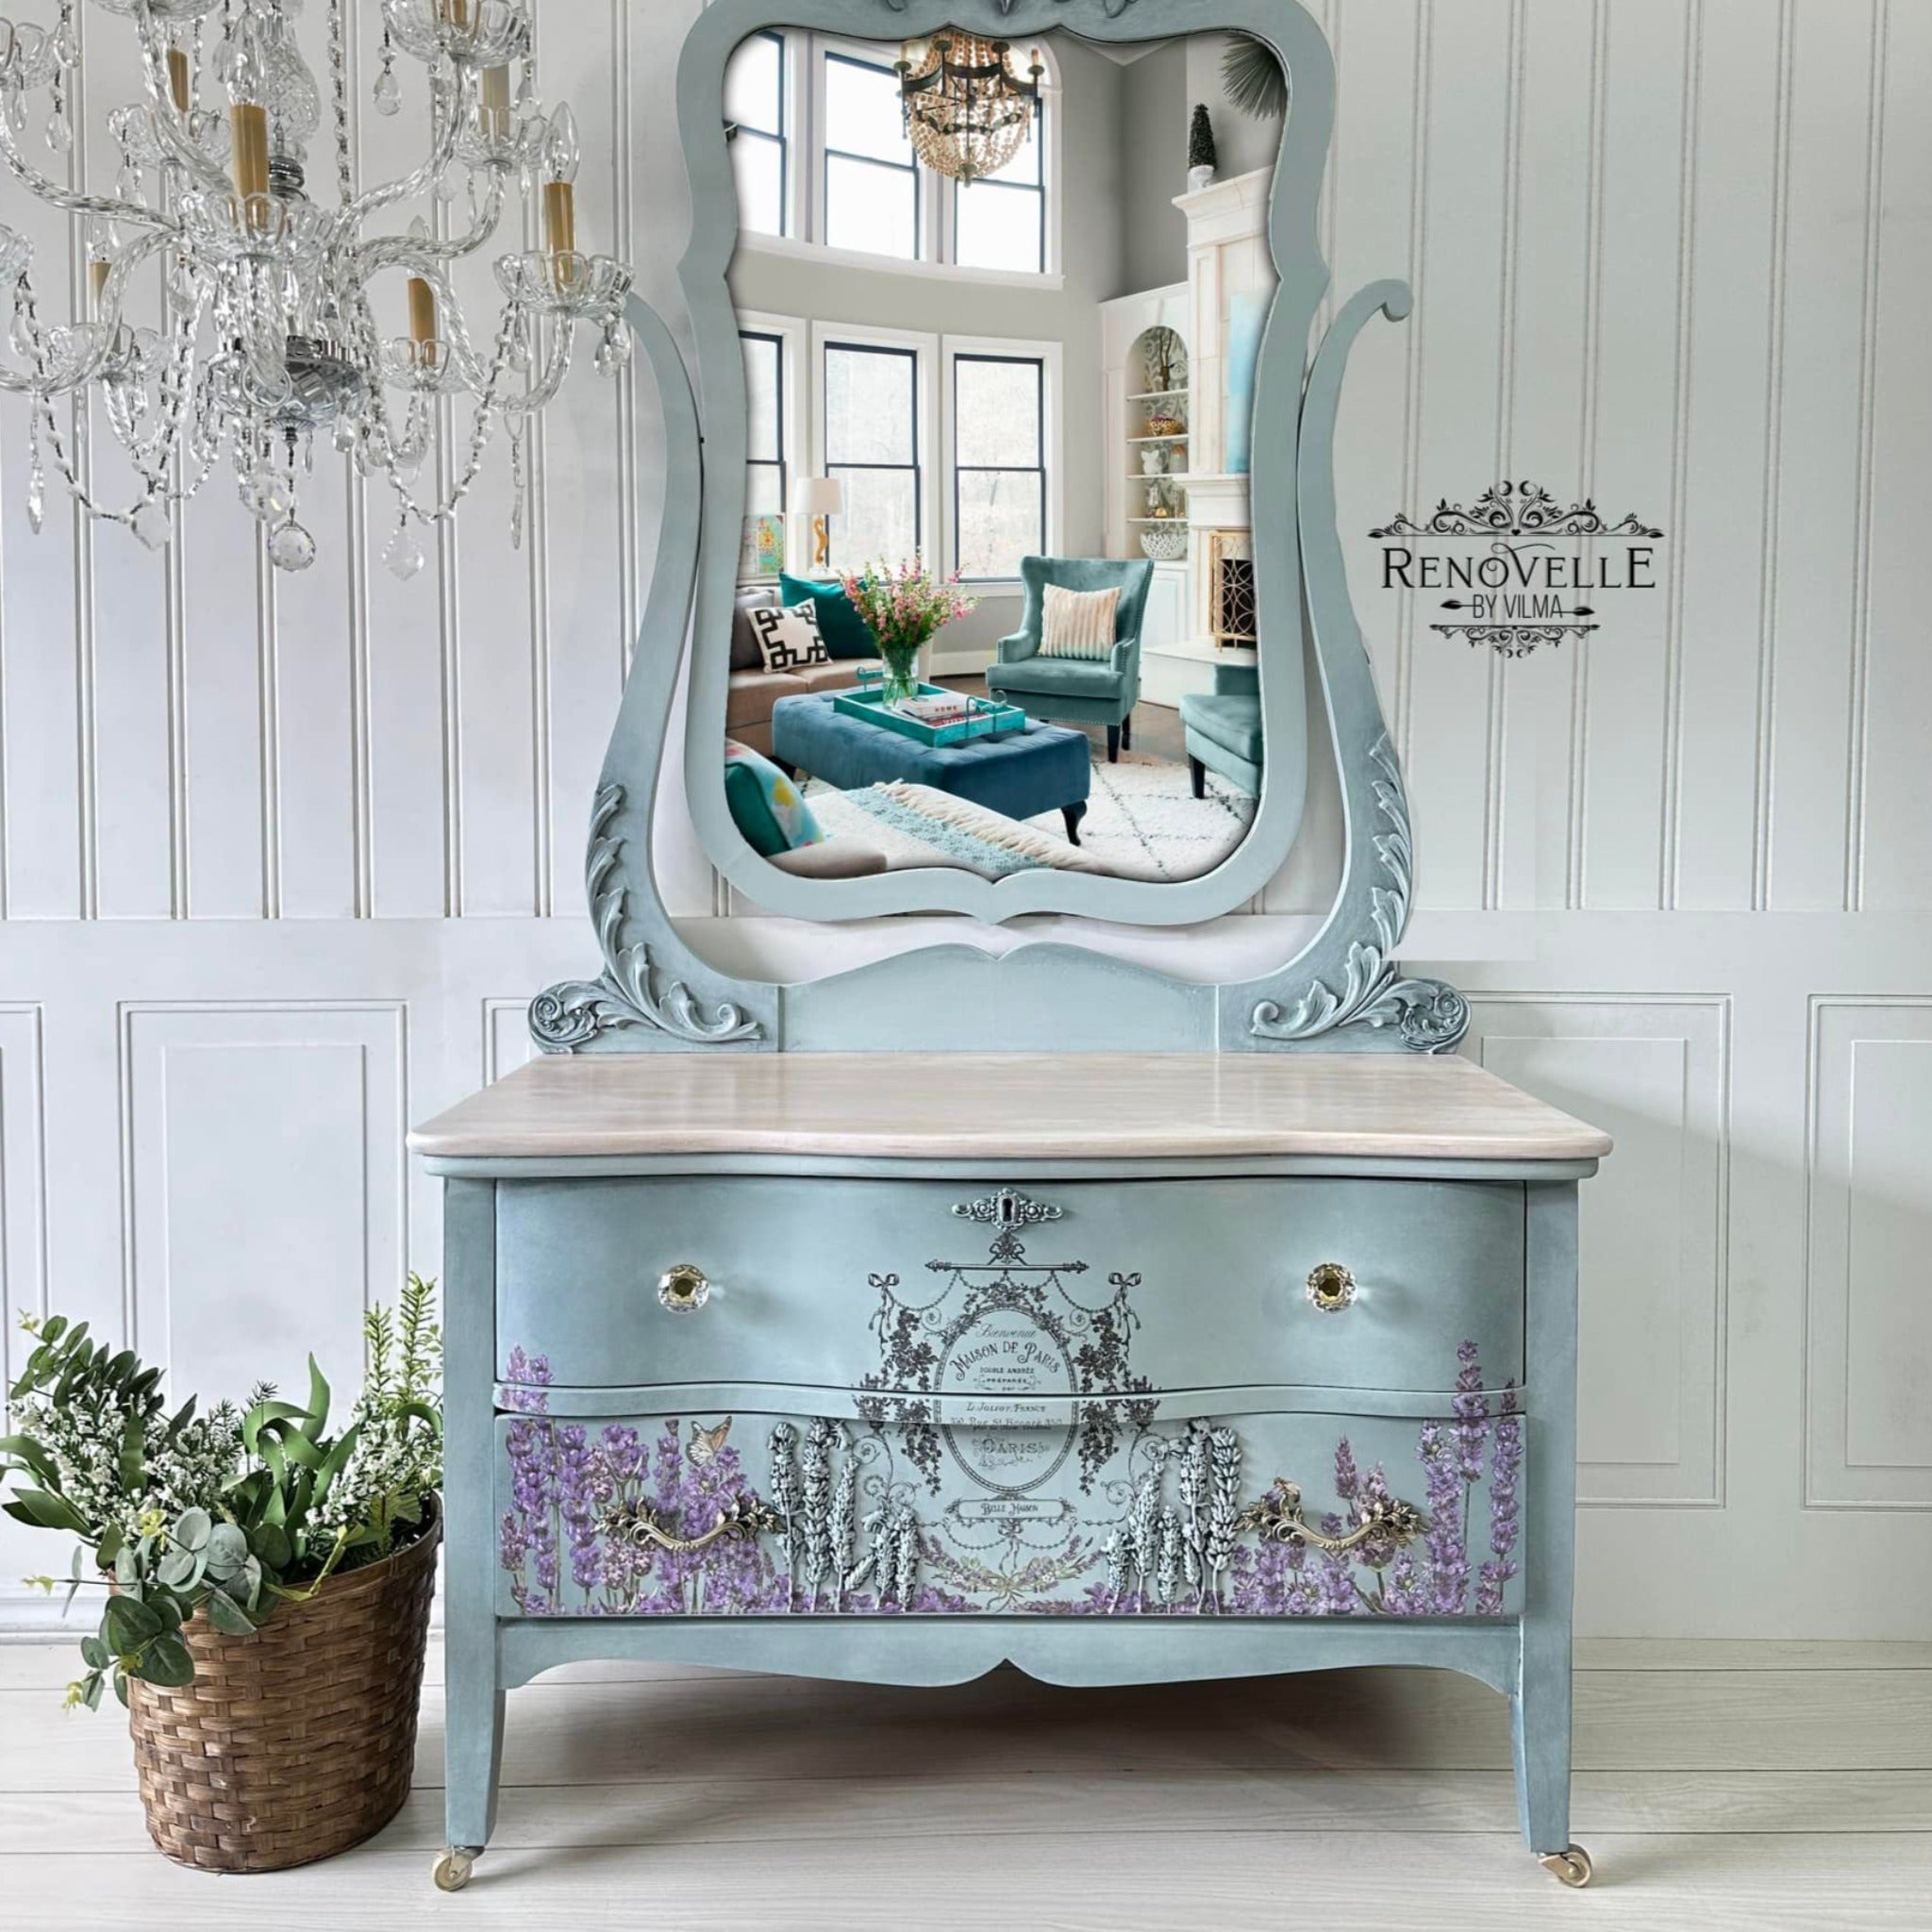 A vintage 2-drawer dresser with an attached mirror refurbished by Renovelle by Vilma is painted pale blue and features ReDesign with Prima's Champs de Lavende transfer on its bottom drawer.